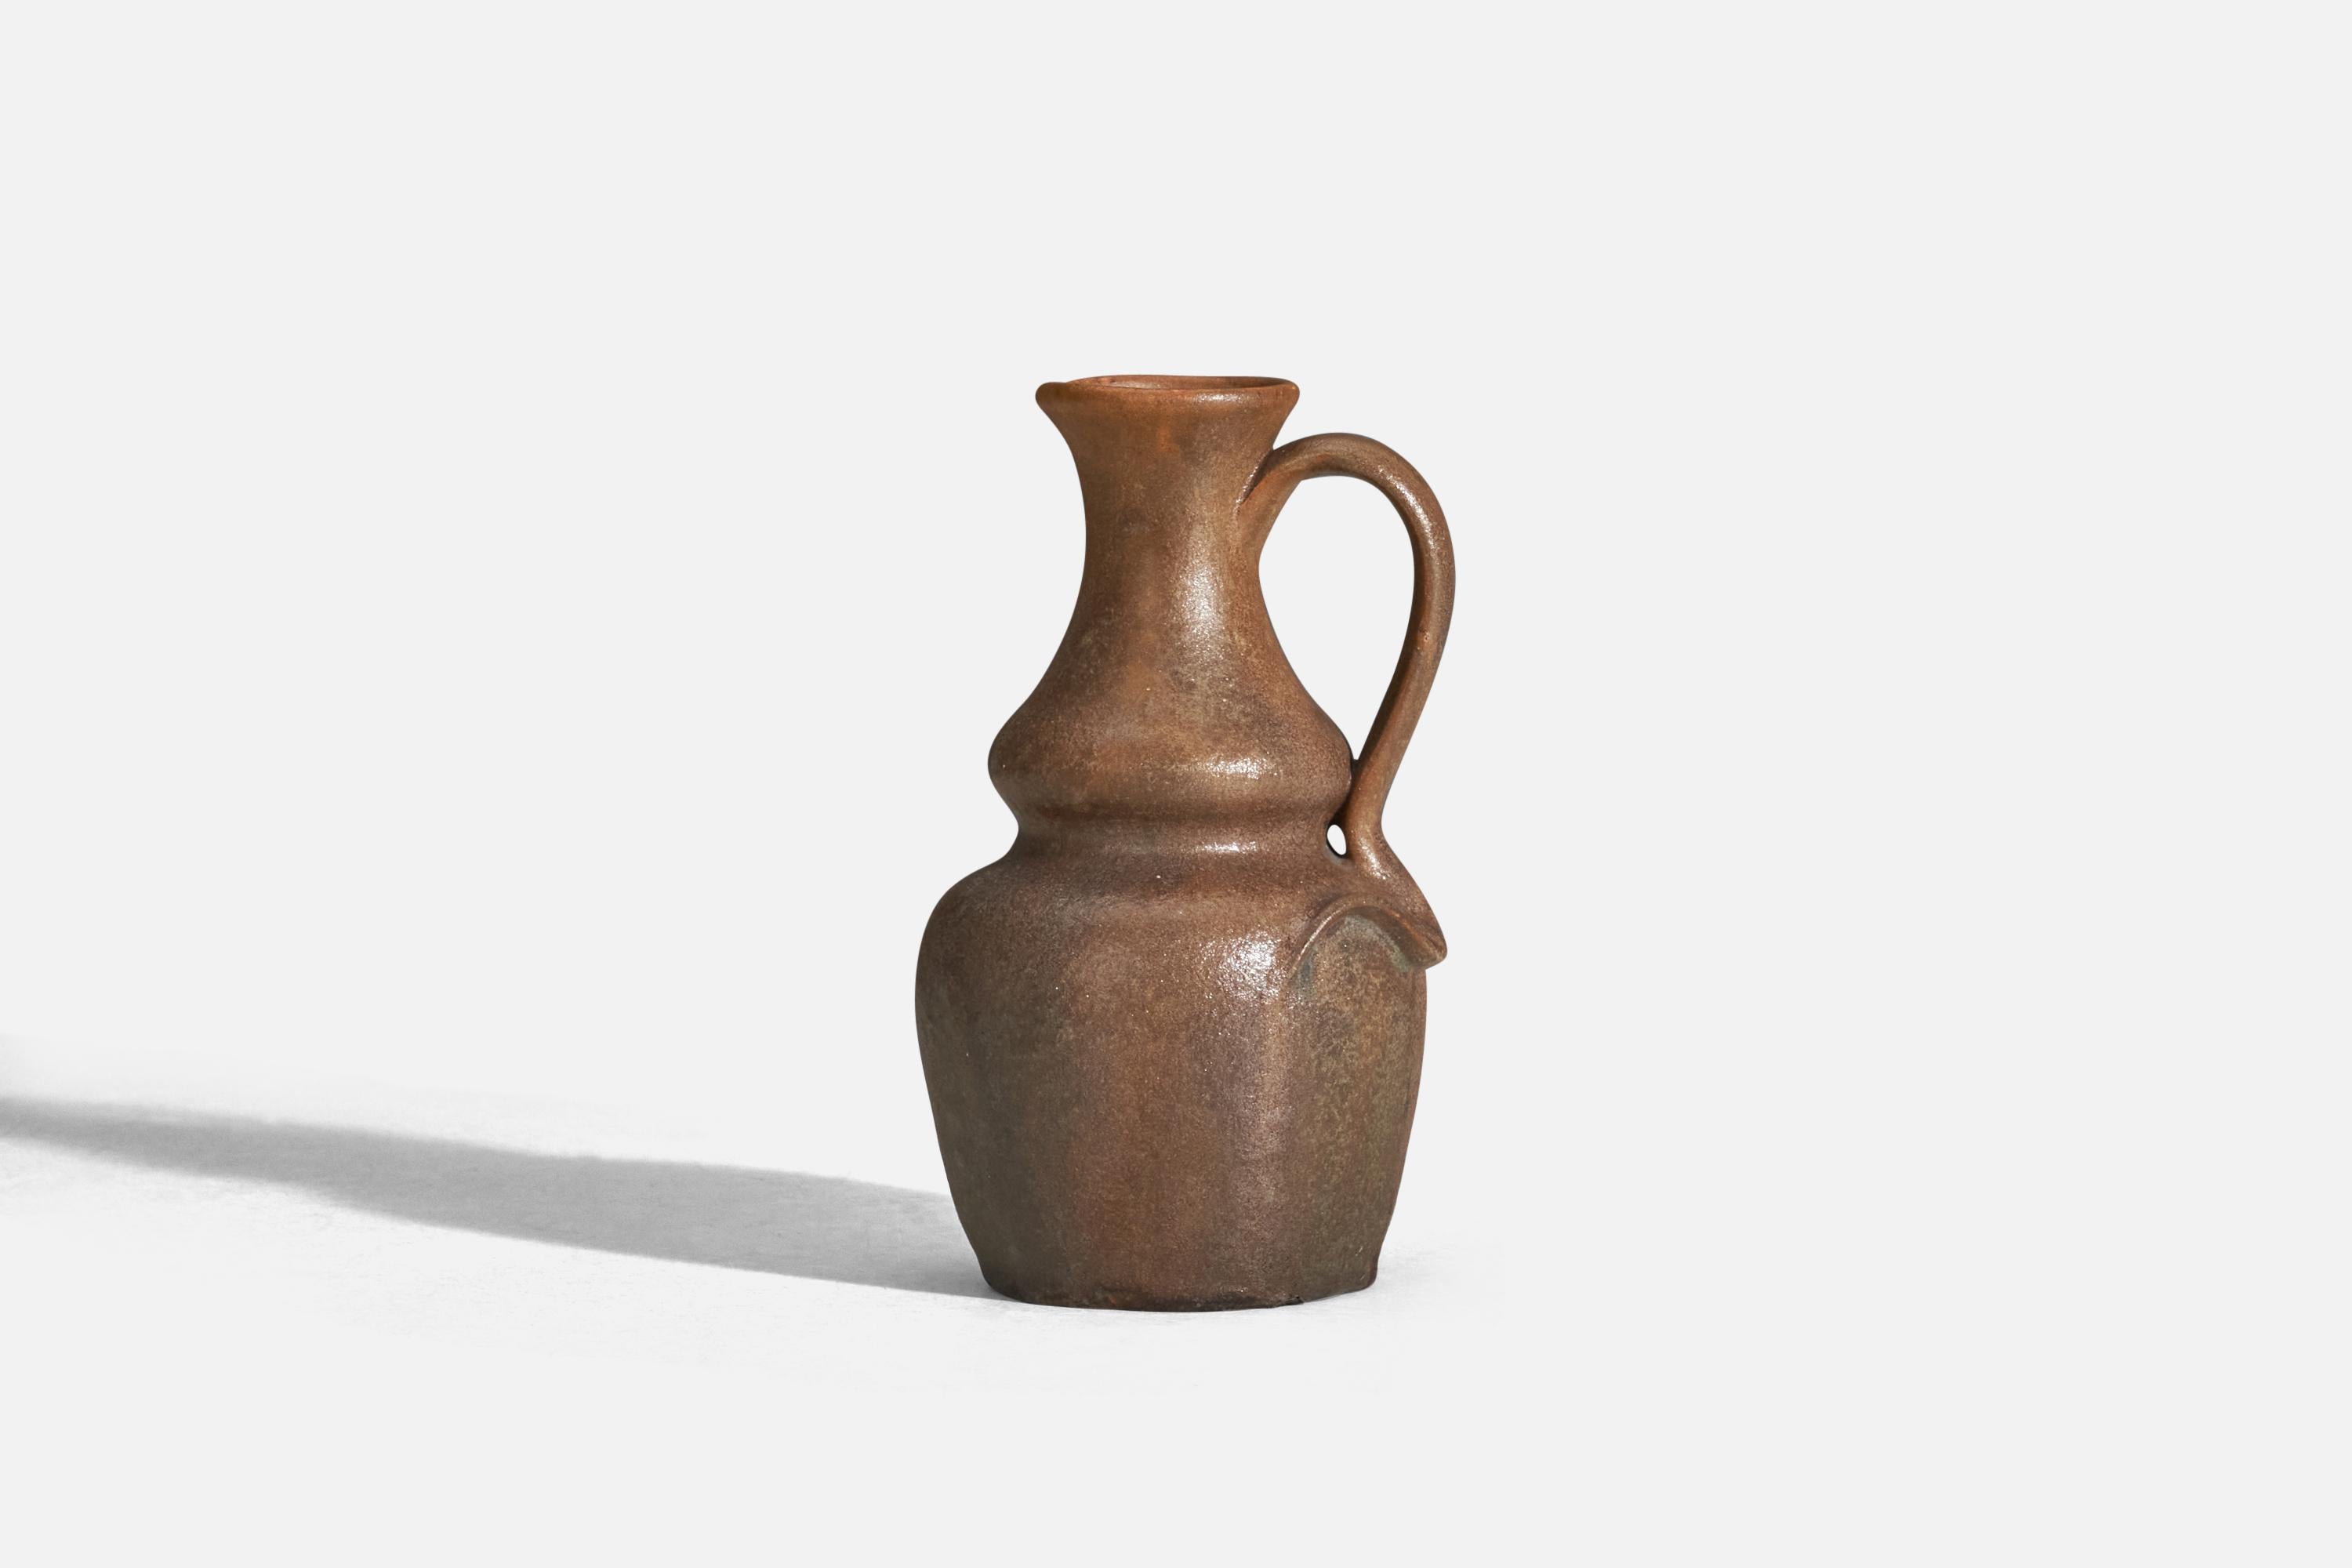 A brown glazed earthenware pitcher designed and produced by Höganas Keramik, Sweden, 1920s.

